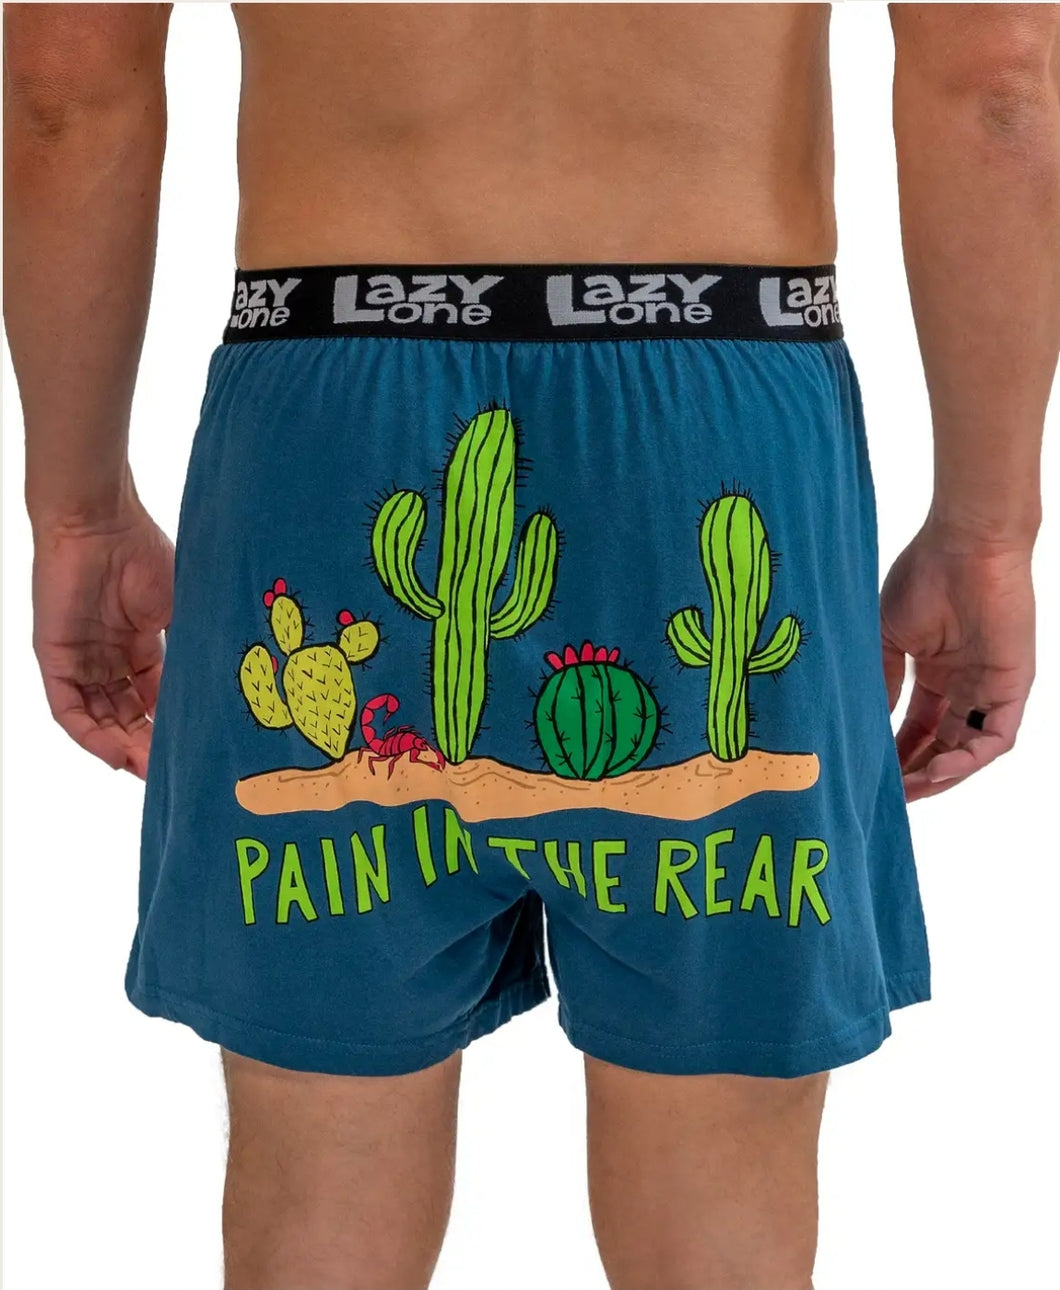 PAIN IN THE REAR BOXER